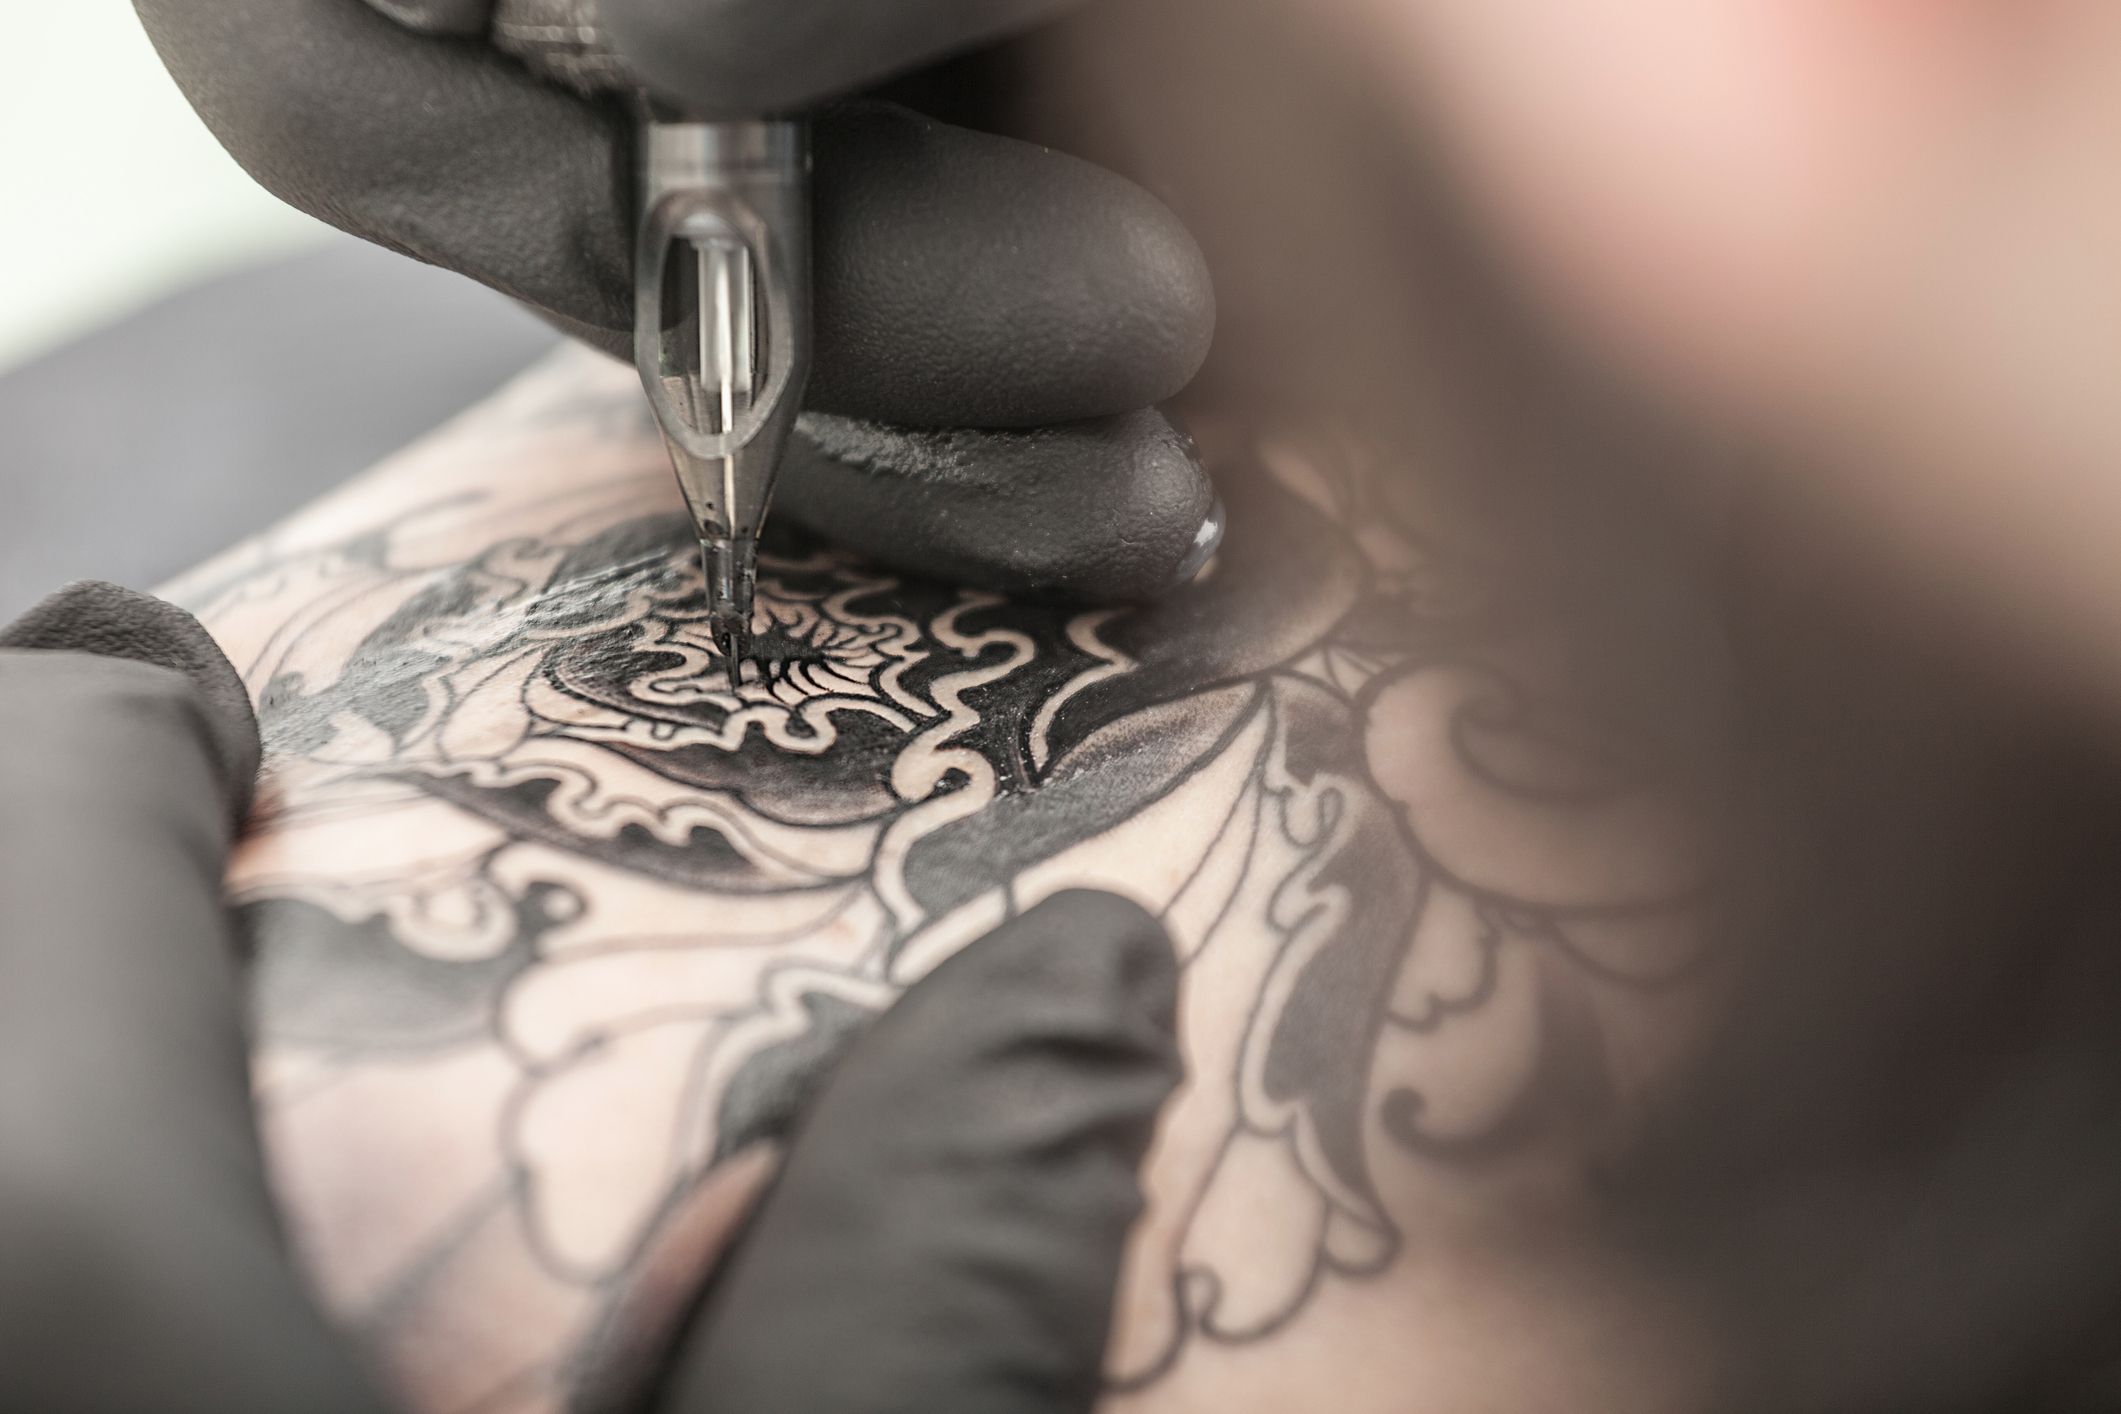 How To Treat An Infected Tattoo | Infected tattoo, Picture tattoos, Tattoos